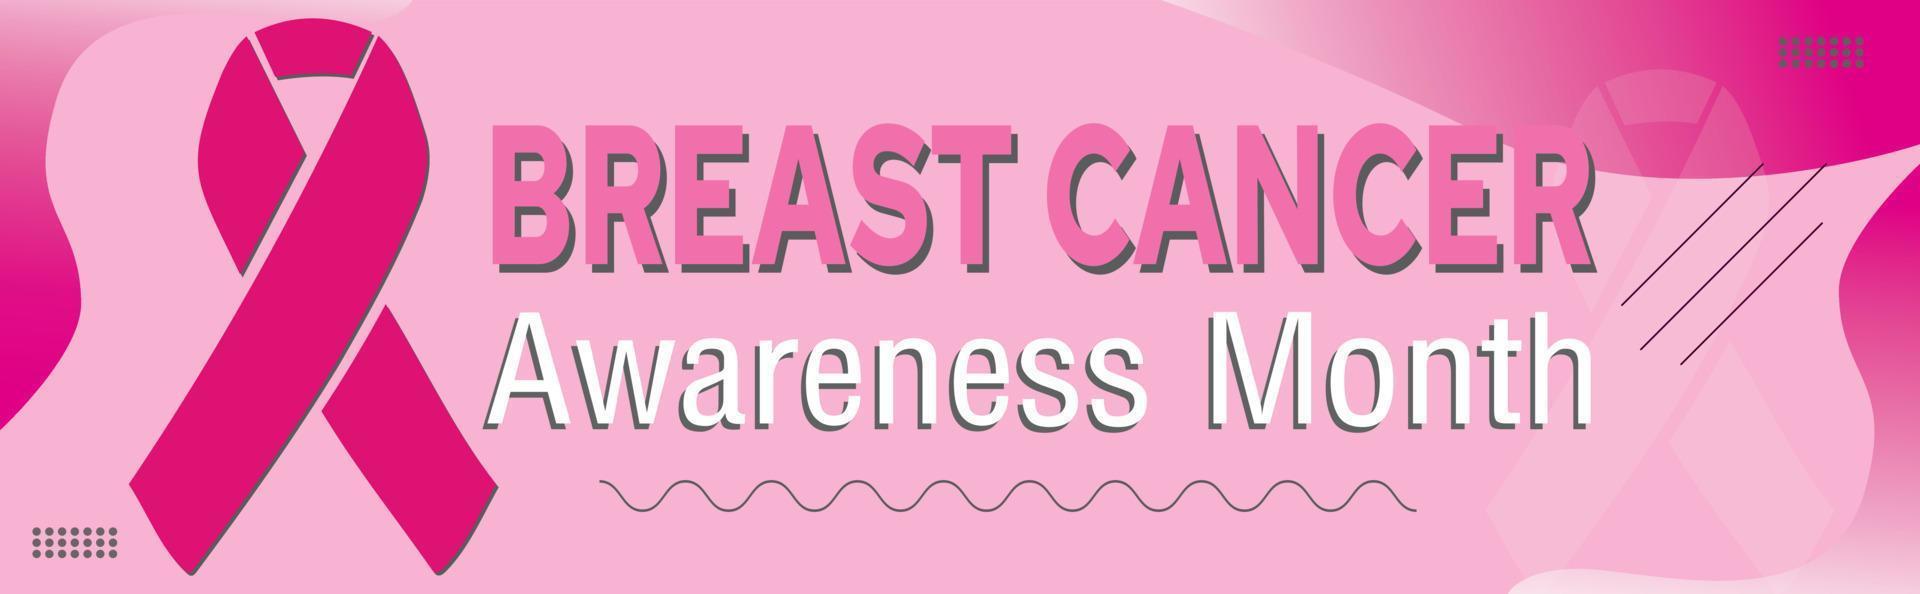 Breast Cancer Awareness Month special day vector eps file  vector Concept